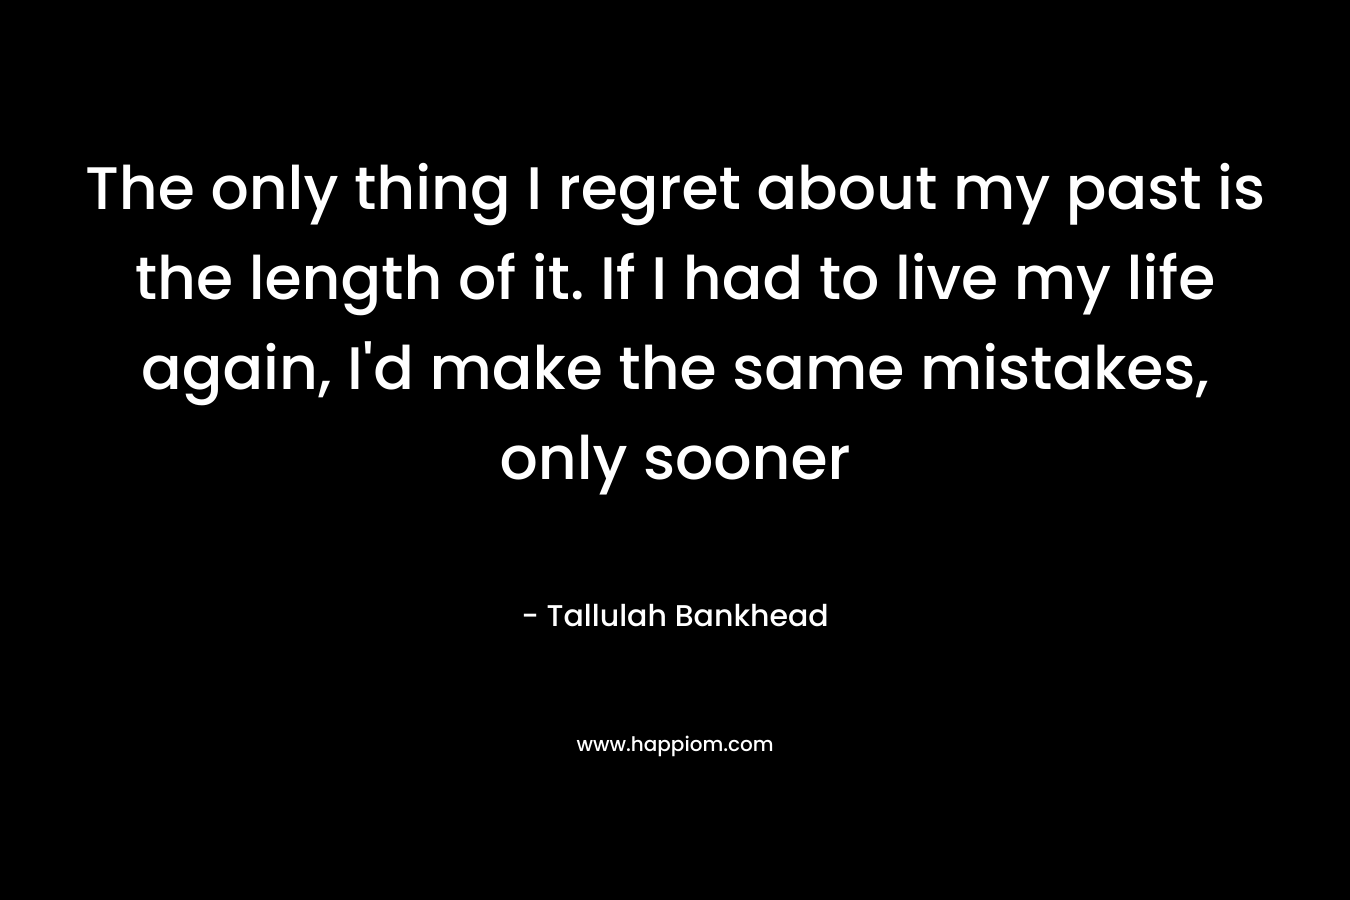 The only thing I regret about my past is the length of it. If I had to live my life again, I’d make the same mistakes, only sooner – Tallulah Bankhead